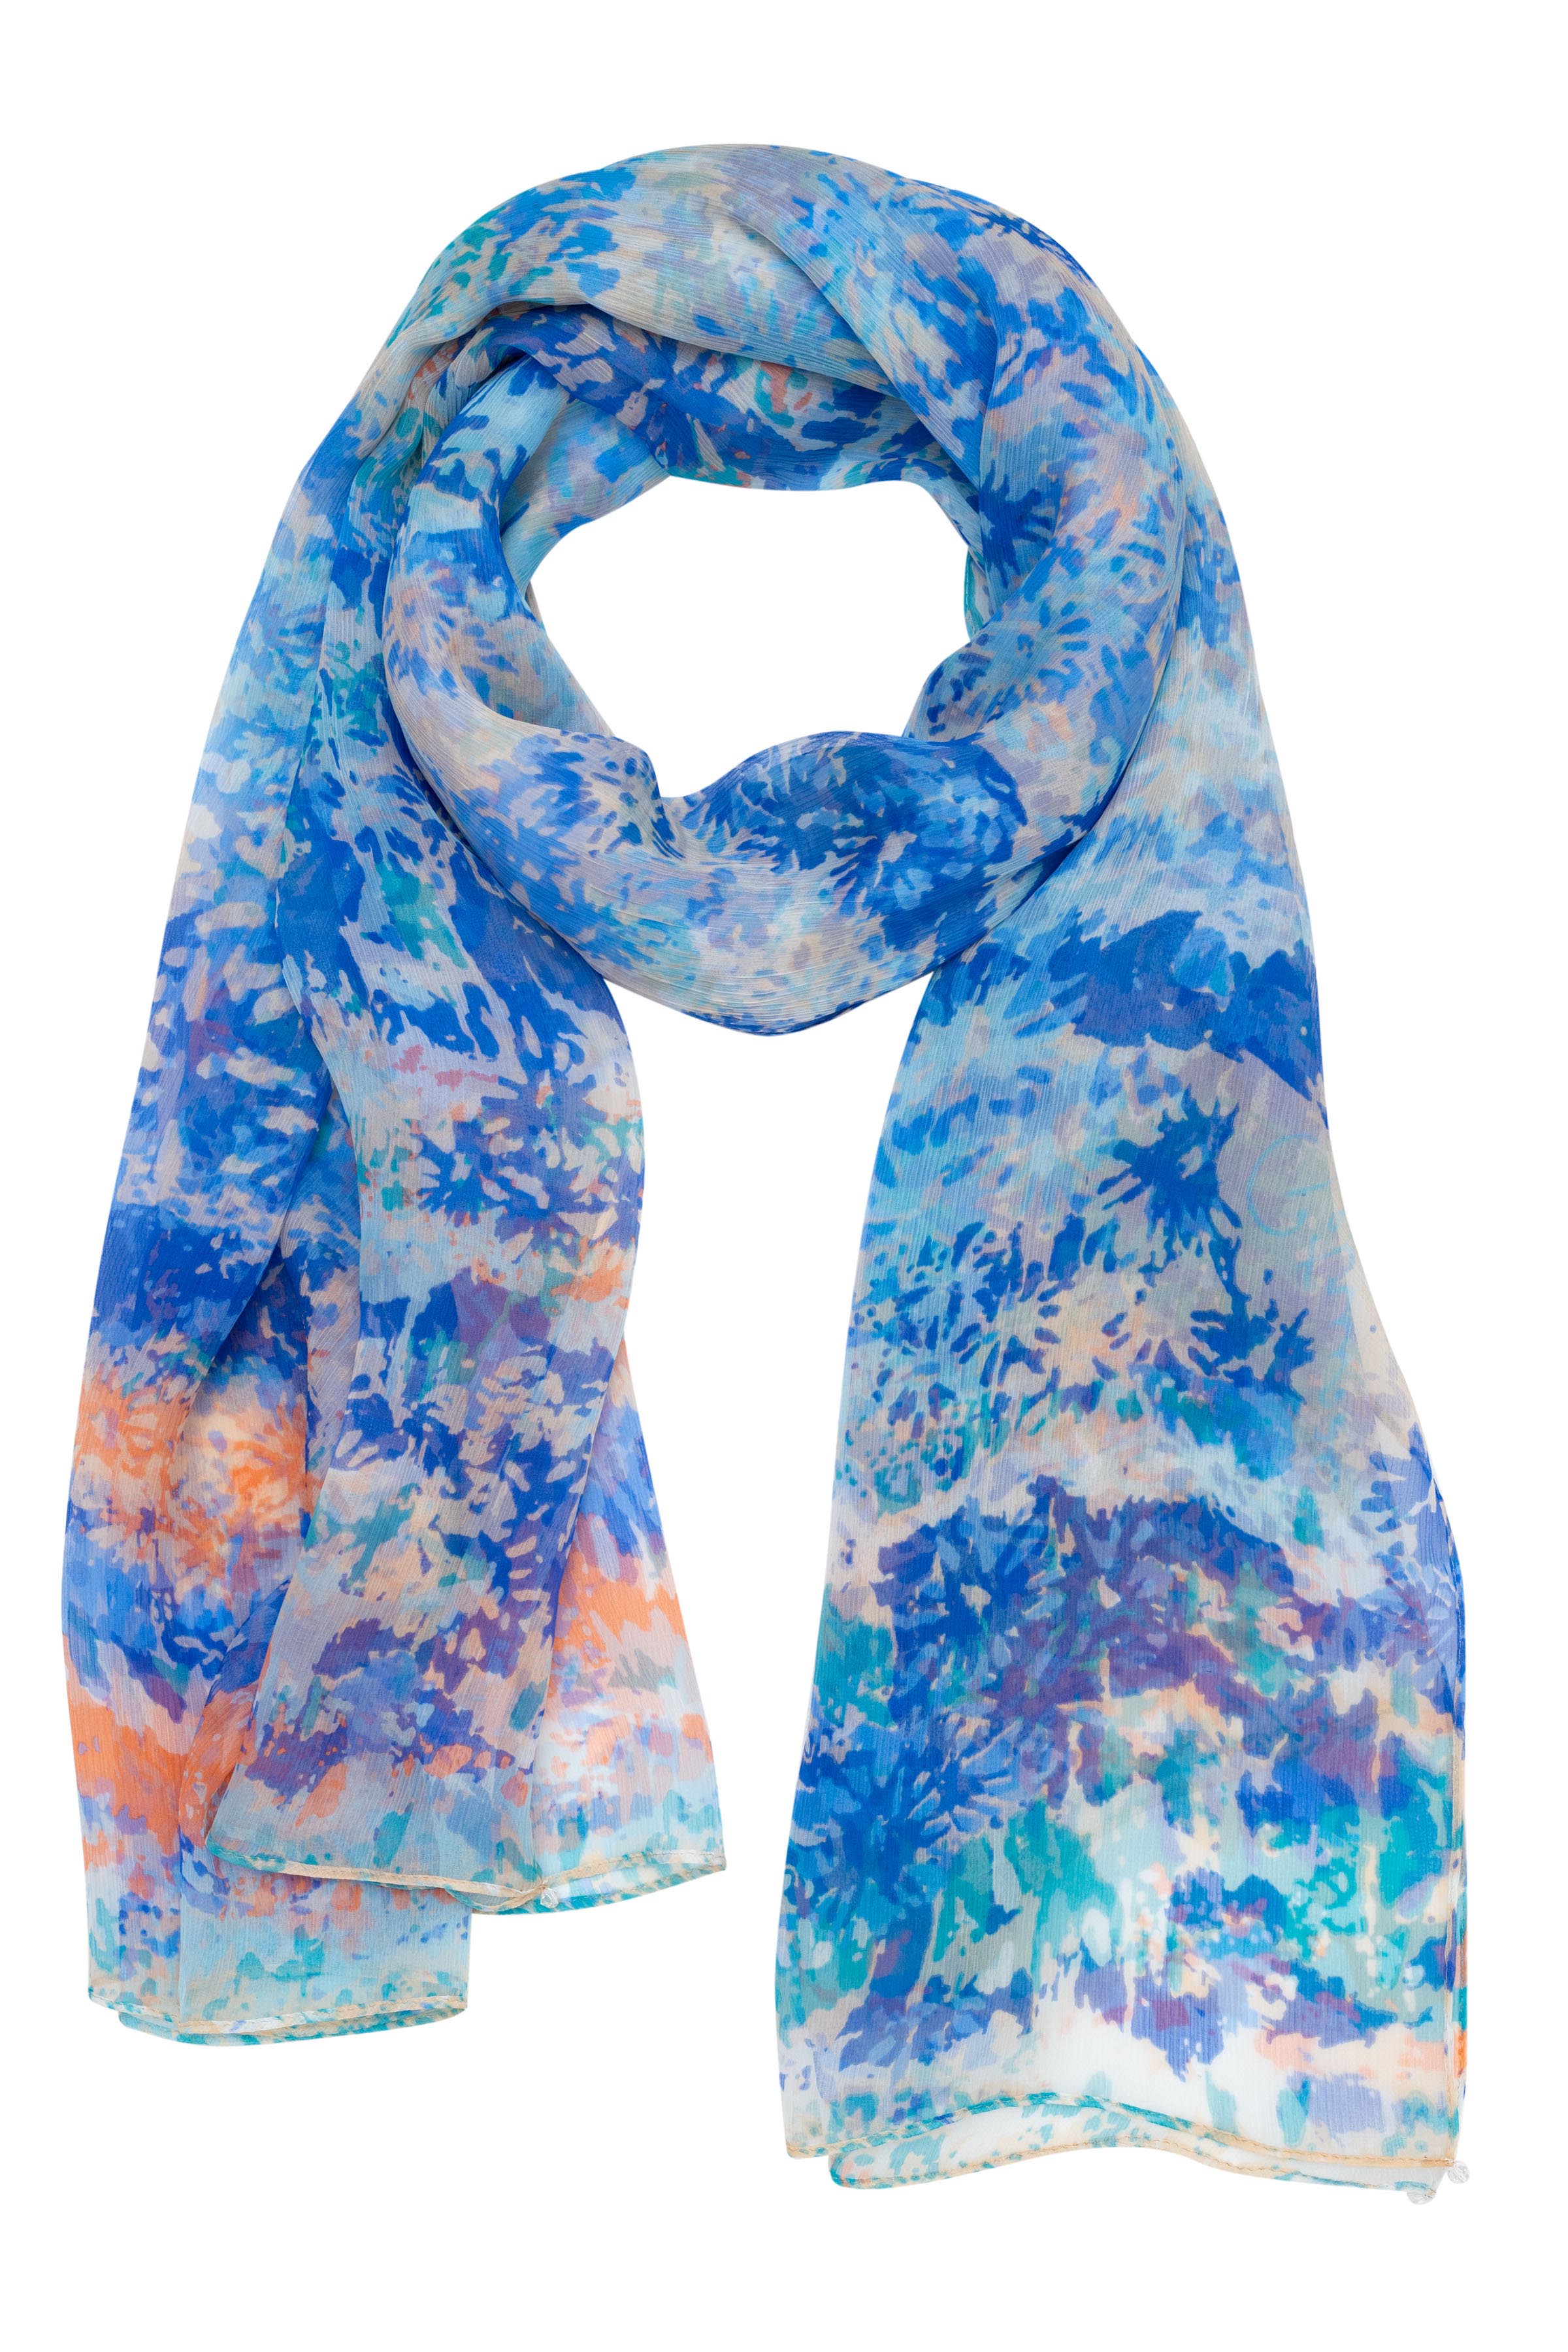 Petrusse Rosee blue shawl tied